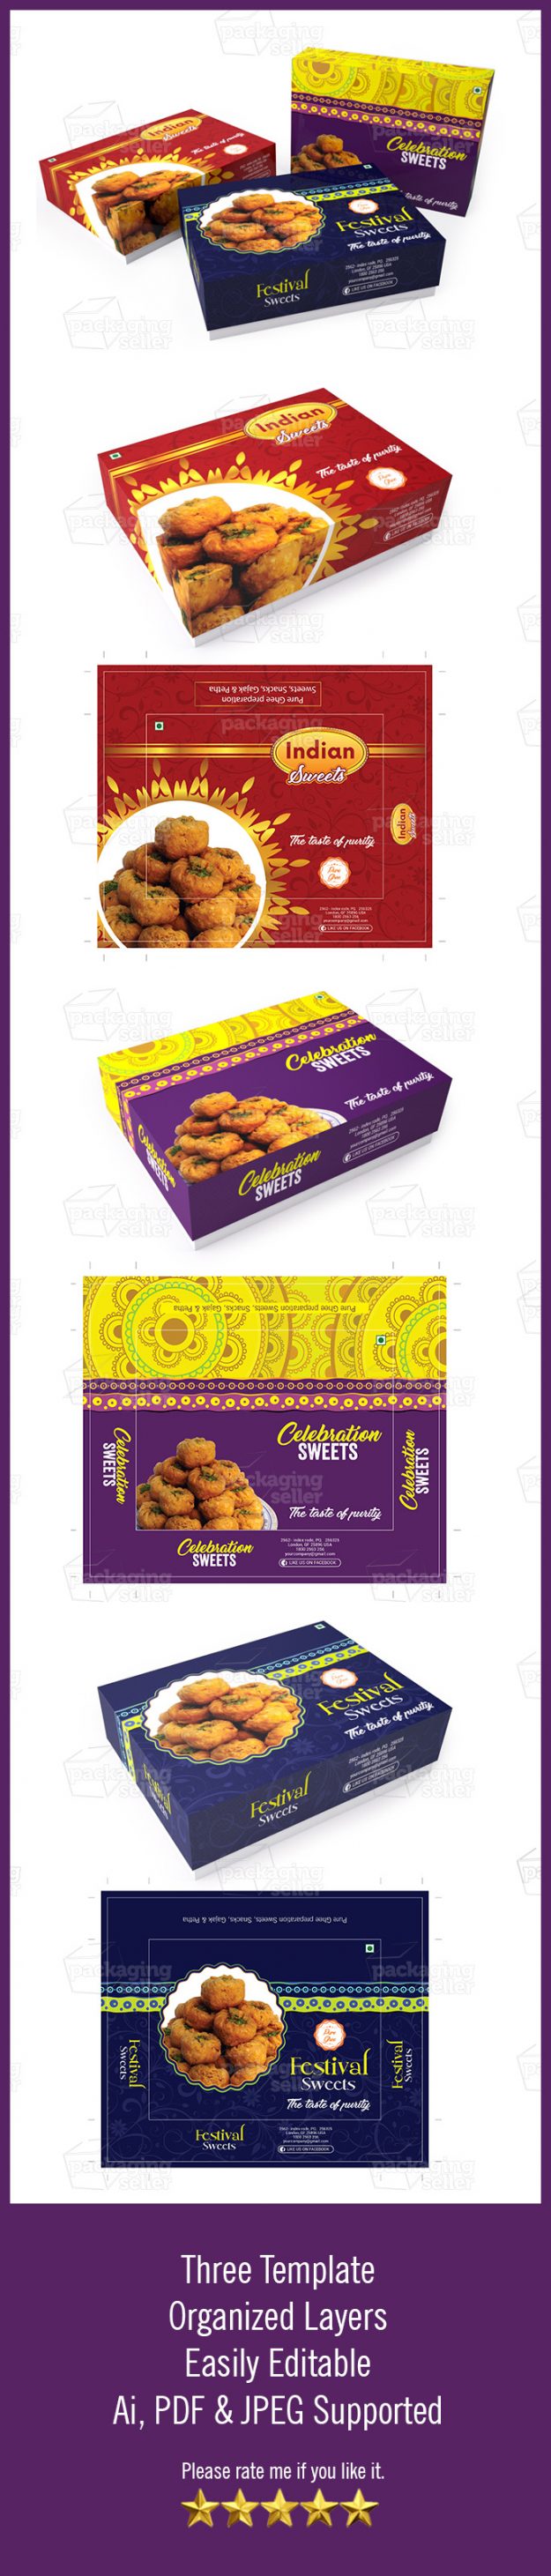 Sweets box Template Design